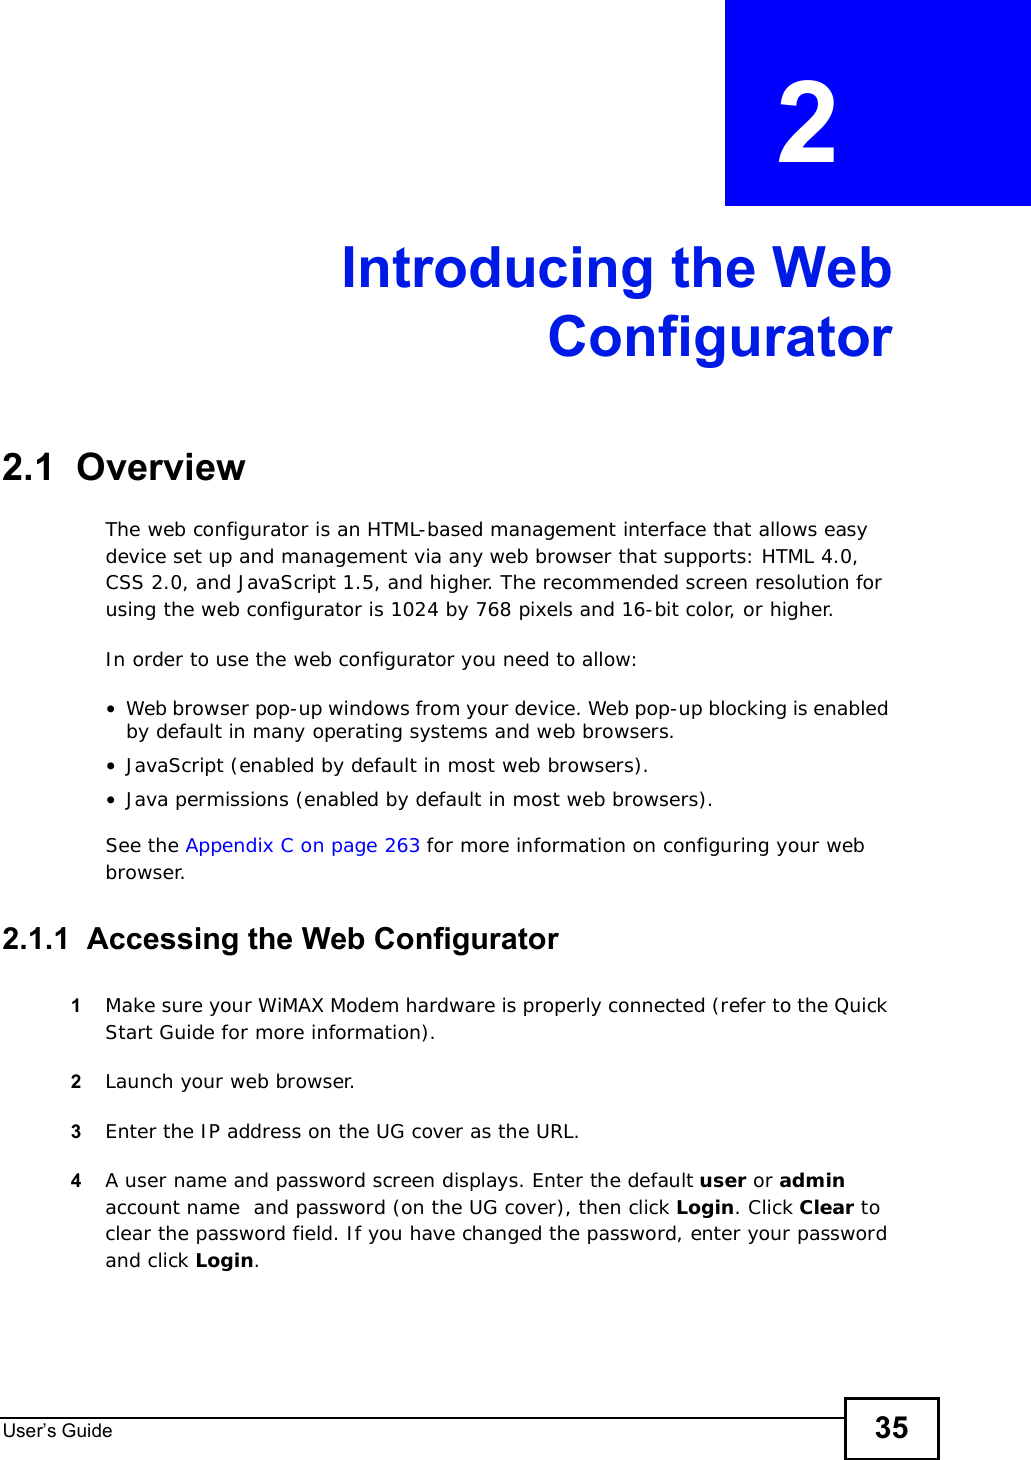 User s Guide 35CHAPTER  2 Introducing the WebConfigurator2.1  OverviewThe web configurator is an HTML-based management interface that allows easy device set up and management via any web browser that supports: HTML 4.0, CSS 2.0, and JavaScript 1.5, and higher. The recommended screen resolution for using the web configurator is 1024 by 768 pixels and 16-bit color, or higher.In order to use the web configurator you need to allow:•Web browser pop-up windows from your device. Web pop-up blocking is enabled by default in many operating systems and web browsers.•JavaScript (enabled by default in most web browsers).•Java permissions (enabled by default in most web browsers).See the Appendix C on page 263 for more information on configuring your web browser.2.1.1  Accessing the Web Configurator1Make sure your WiMAX Modem hardware is properly connected (refer to the Quick Start Guide for more information).2Launch your web browser.3Enter the IP address on the UG cover as the URL.4A user name and password screen displays. Enter the default user or adminaccount name  and password (on the UG cover), then click Login. Click Clear to clear the password field. If you have changed the password, enter your password and click Login.